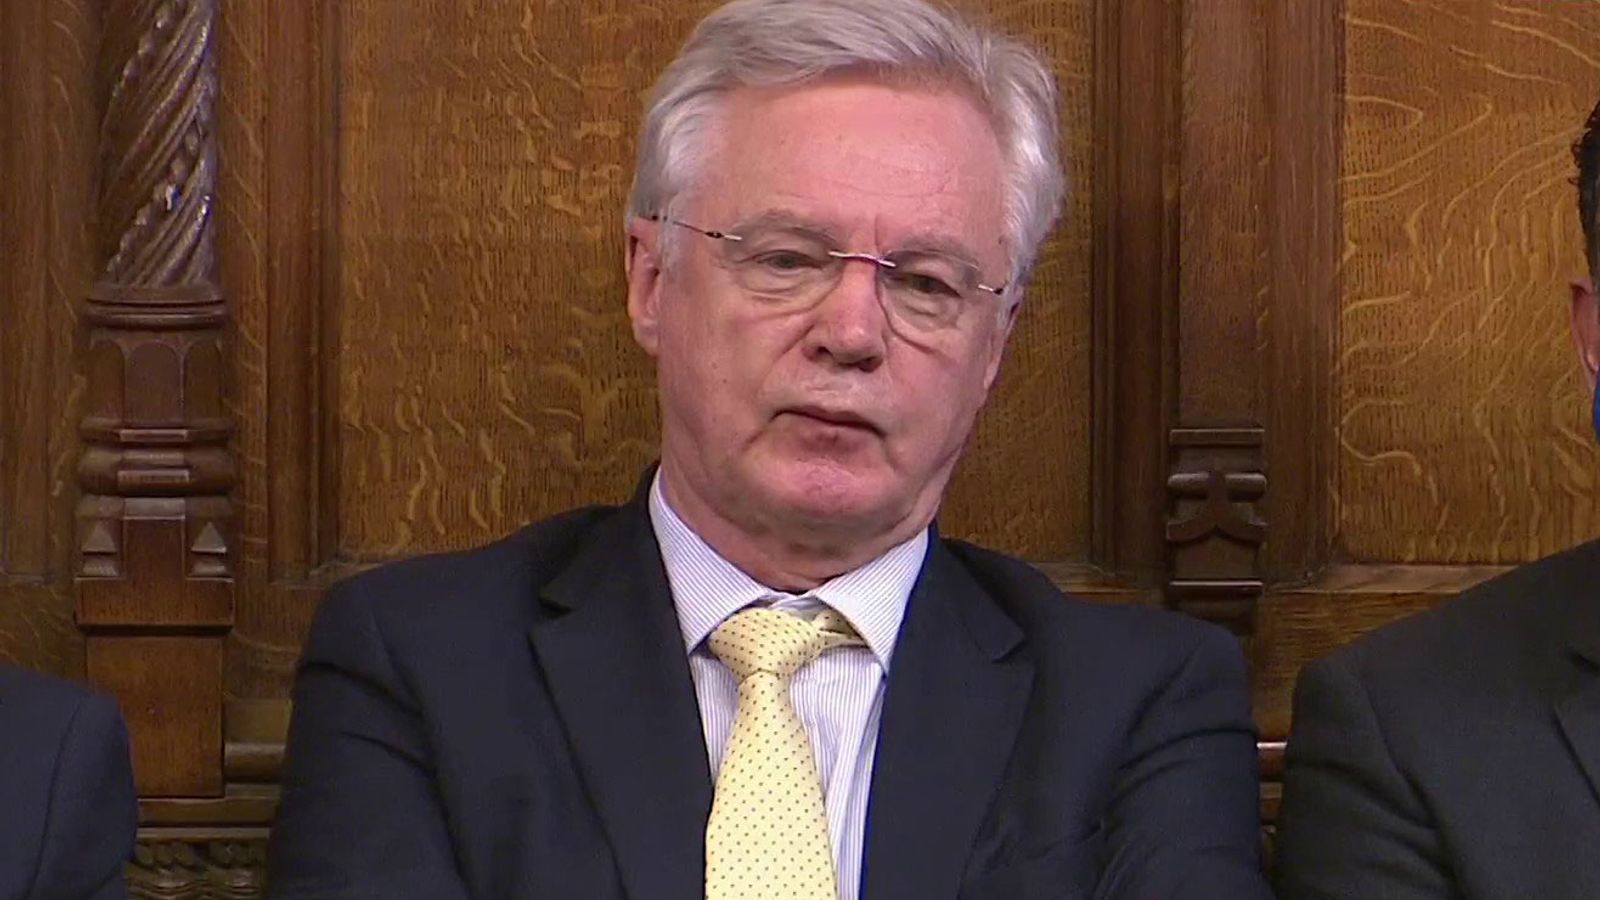 David Davis: Former minister hailed as 'heroic' after intervening to stop street attack on homeless man